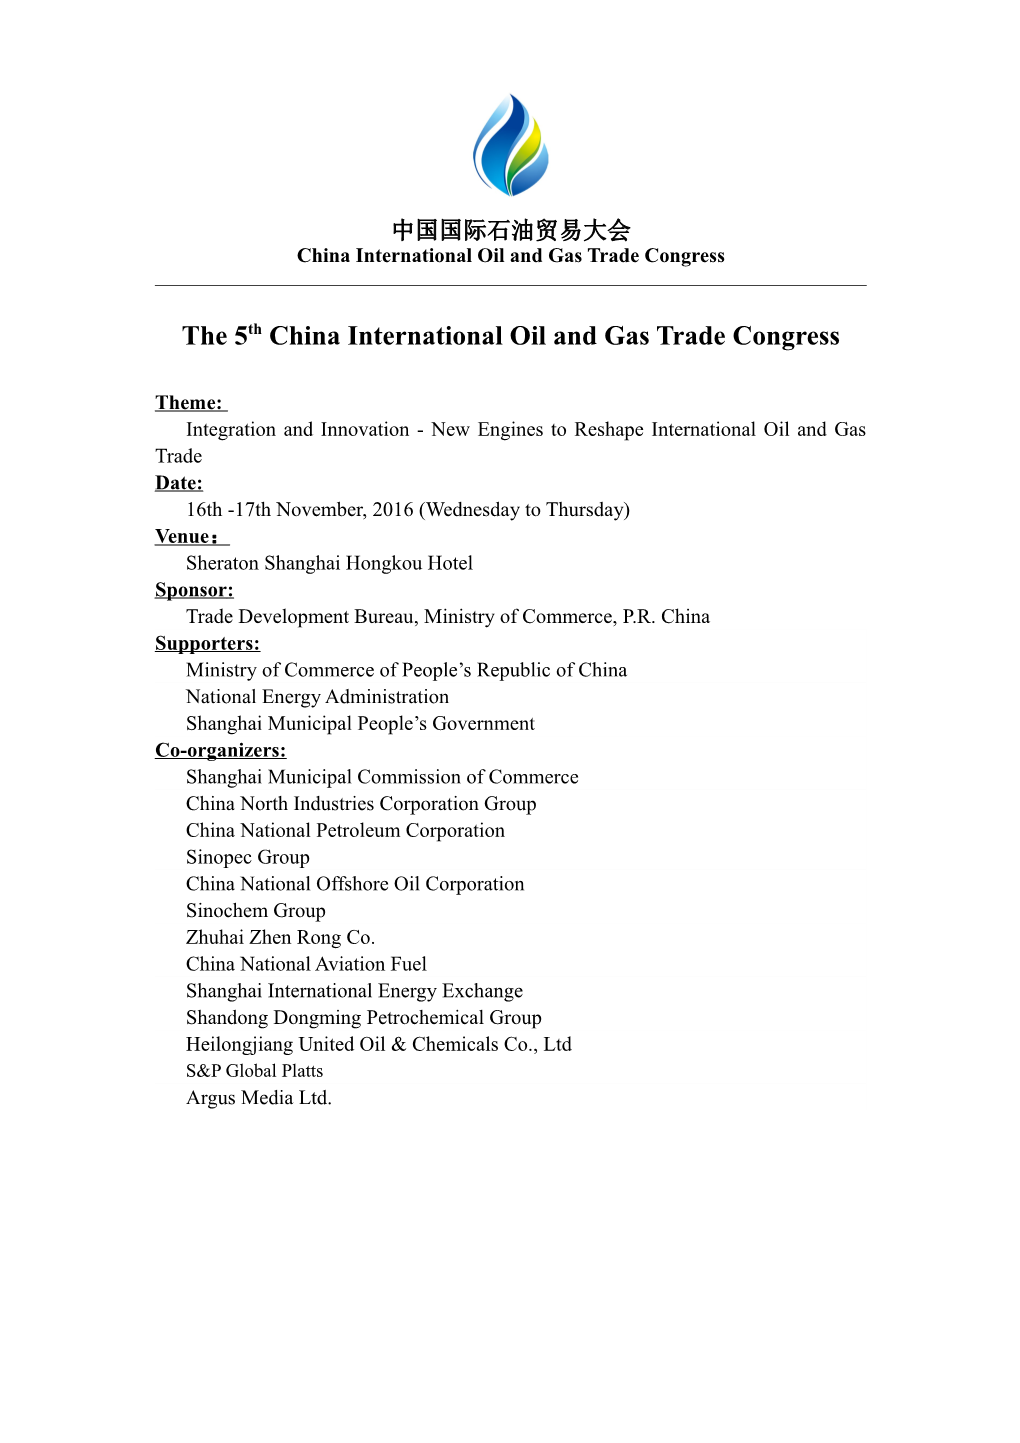 China International Oil and Gas Trade Congress